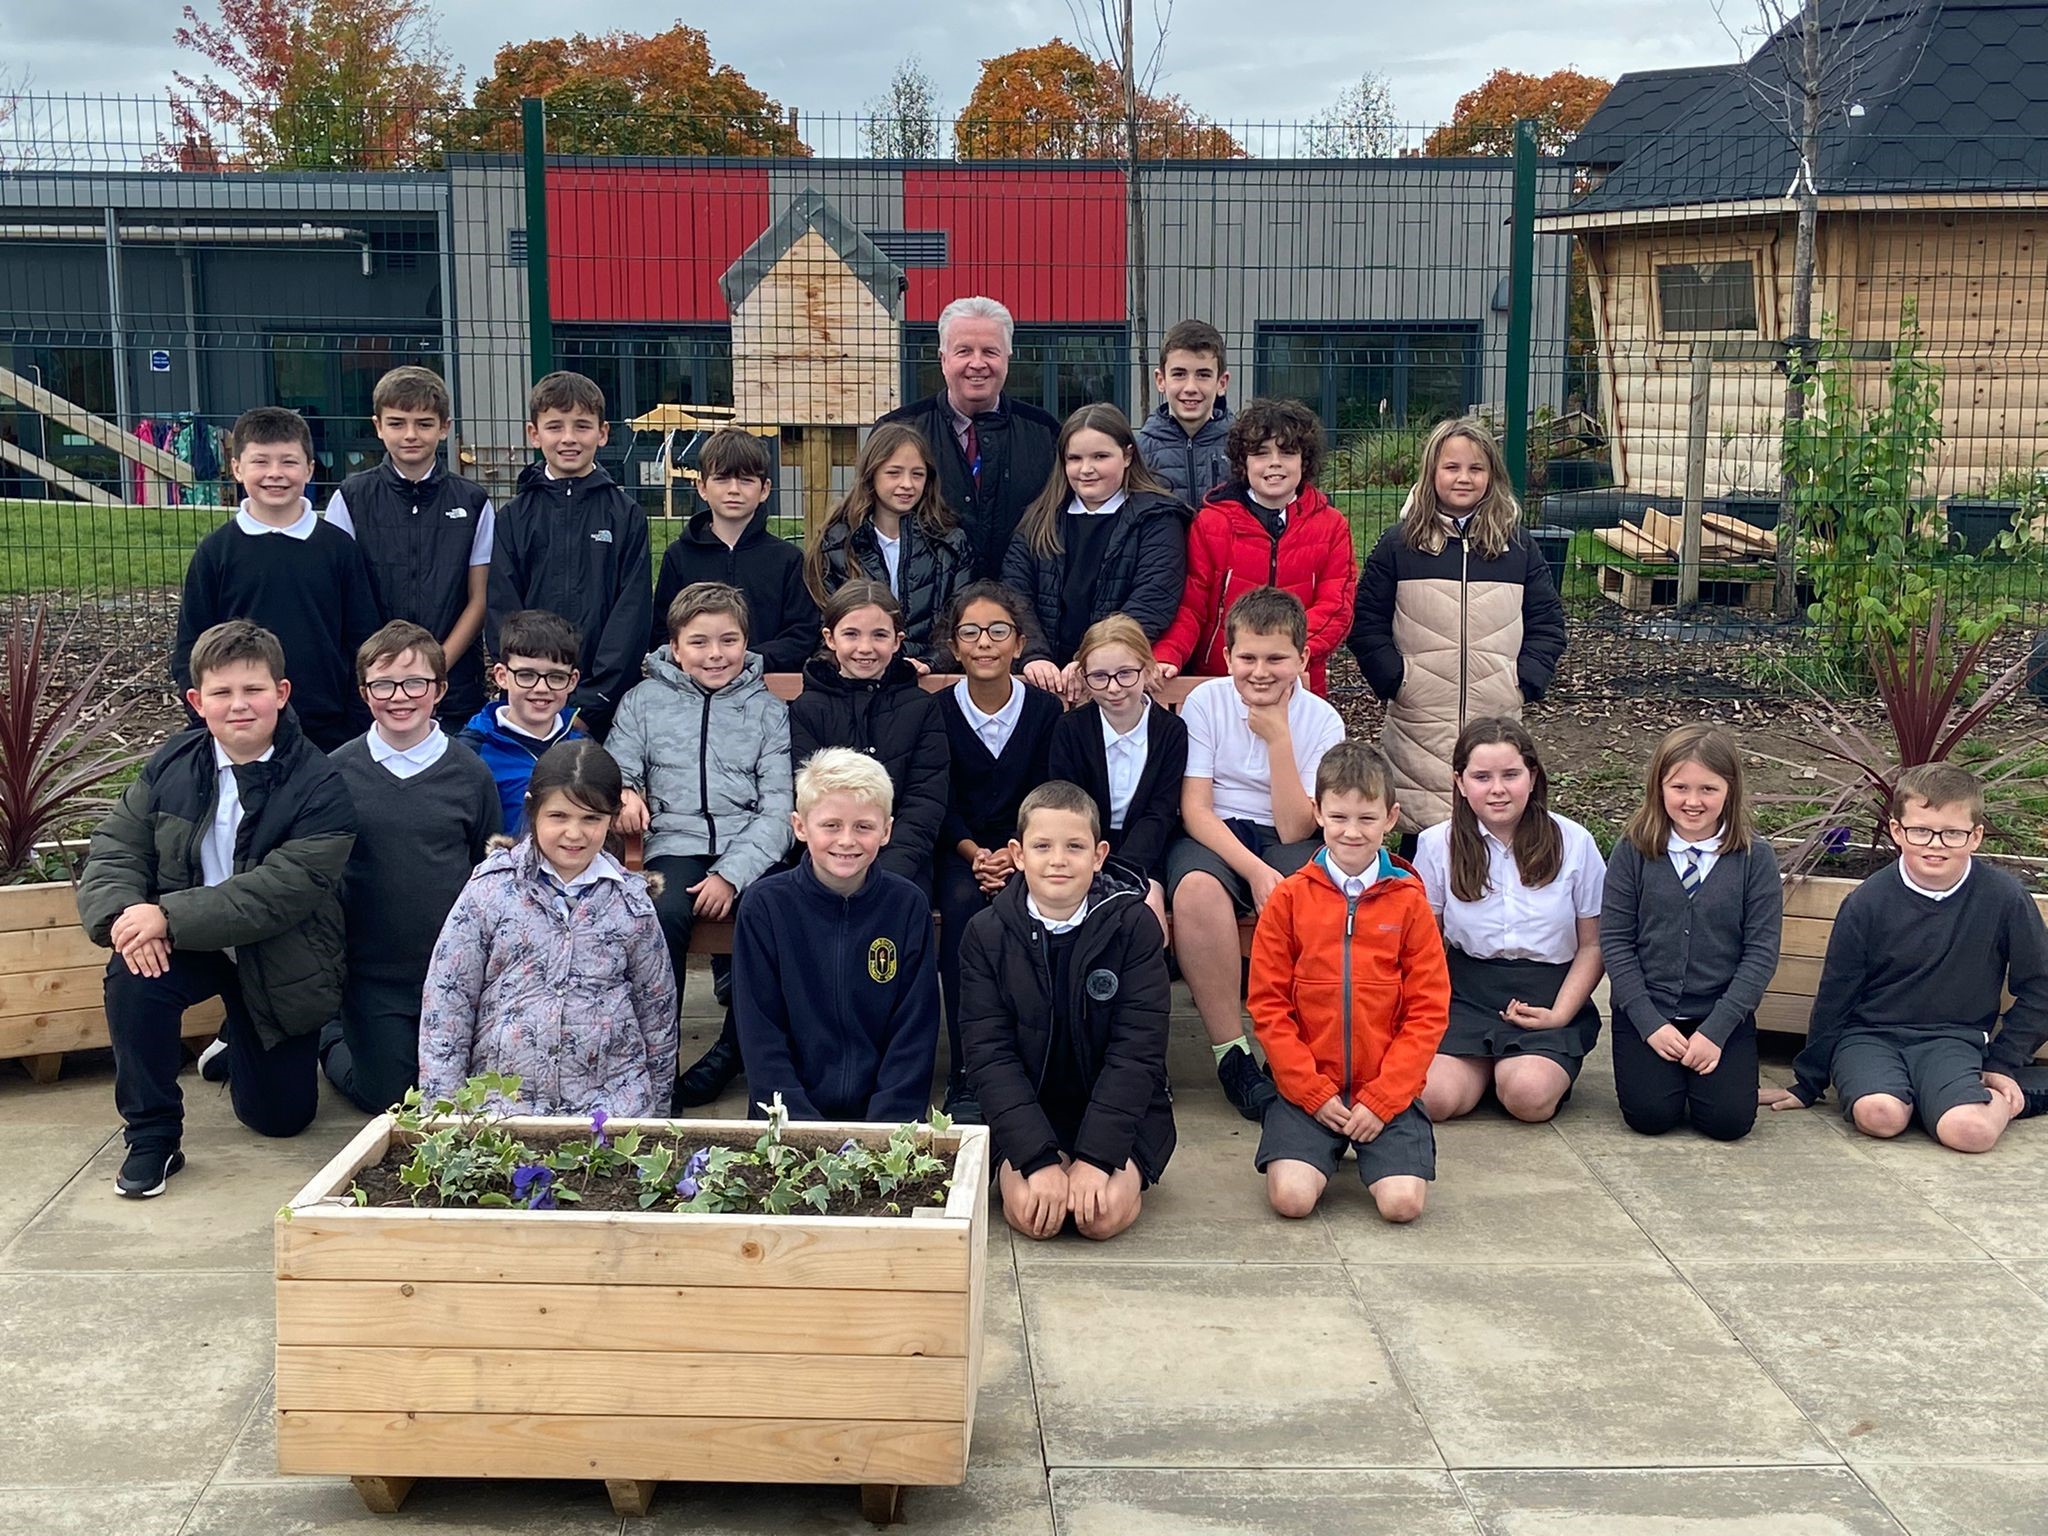 JR Group supports Ayr school with memorial garden